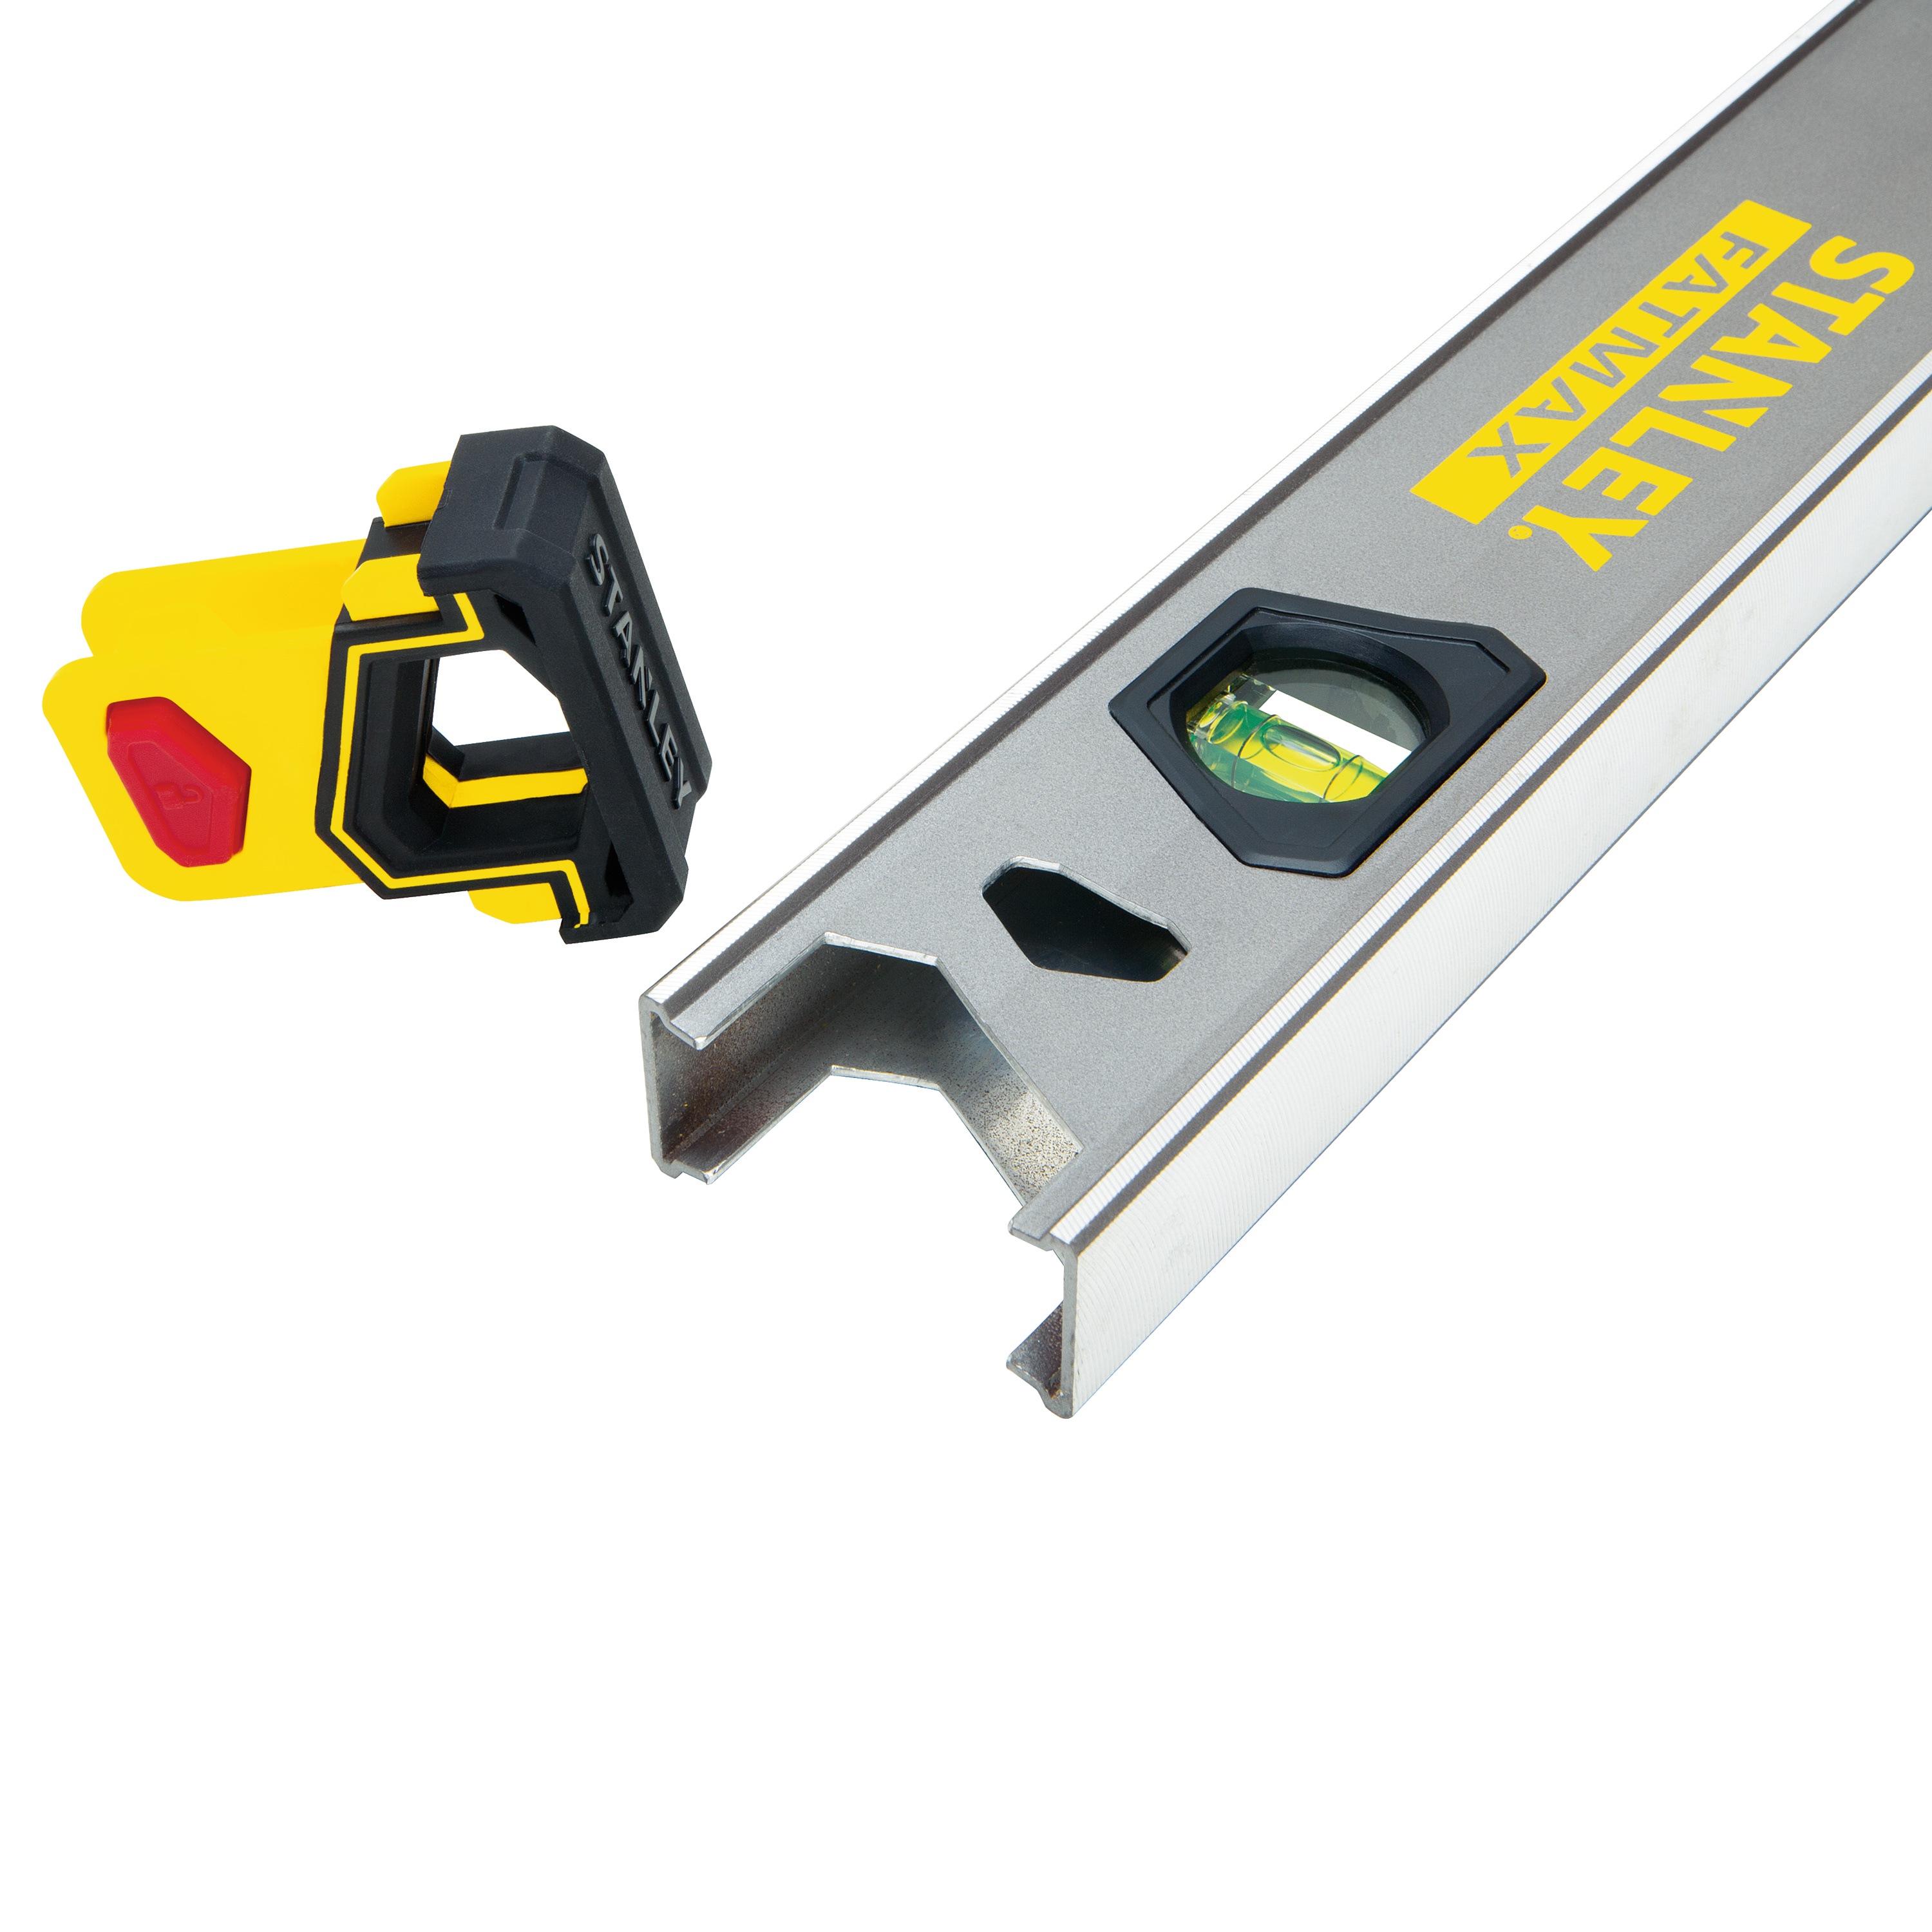 Stanley Tools - 48 in FATMAX Premium Box Beam with Hook - FMHT42400